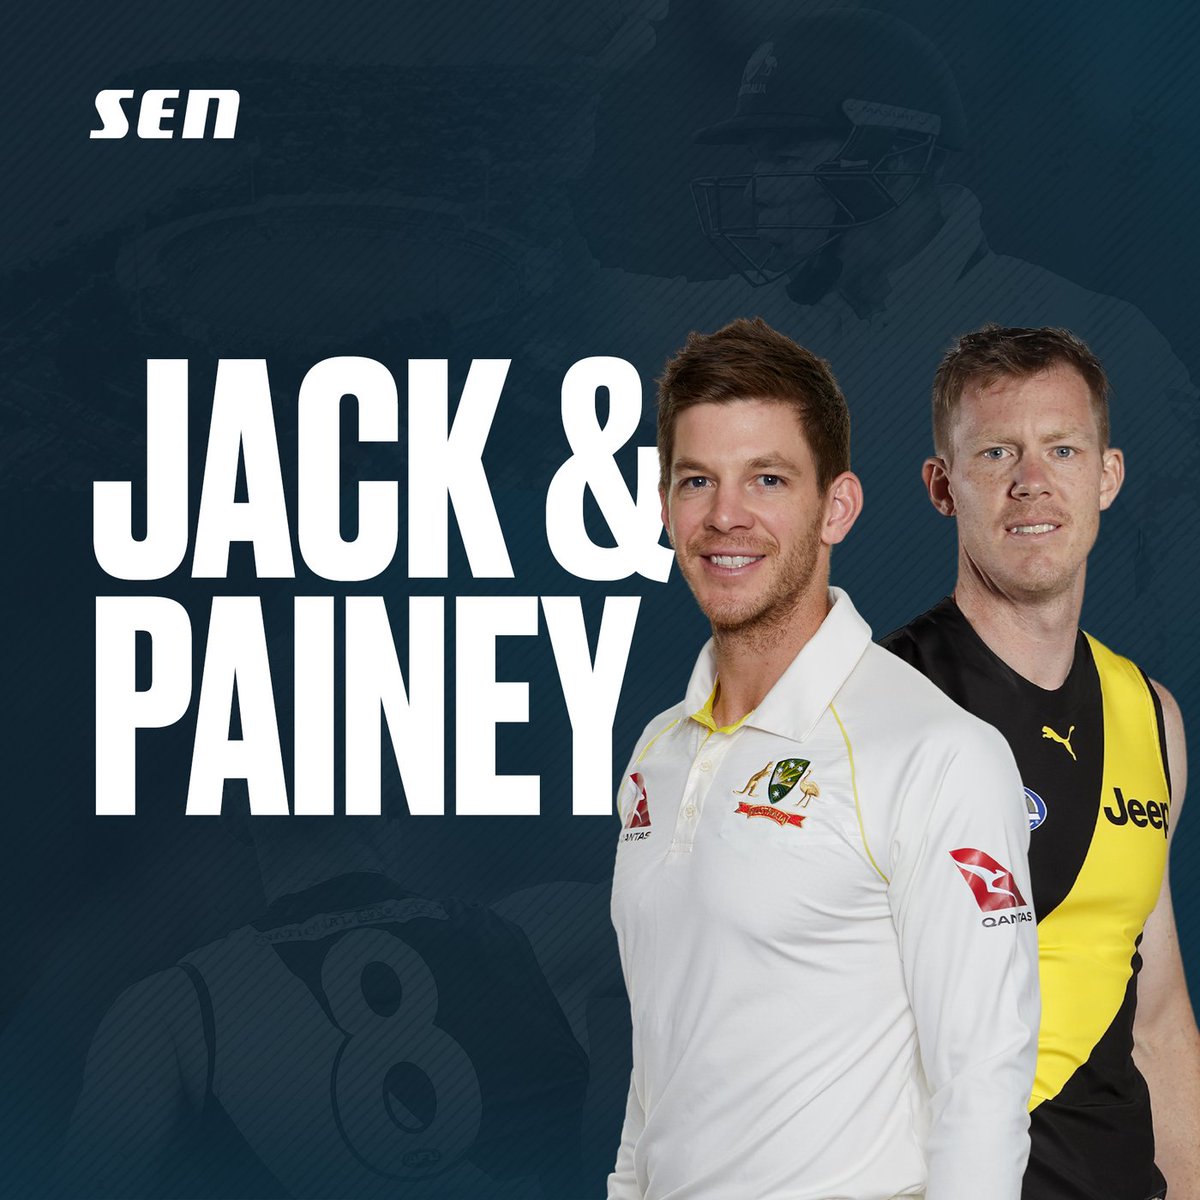 NOW | Coming up with @JackRiewoldt08 and @lithgowflashman:
- @tdpaine36 speaks for the first time on his recent surgery
- @birchall14 on his retirement
- We'll check in with @TasStateLeague Premiers @LauncestonFC
- Plus this week's big footy issues

1629 Hobart or the SEN app